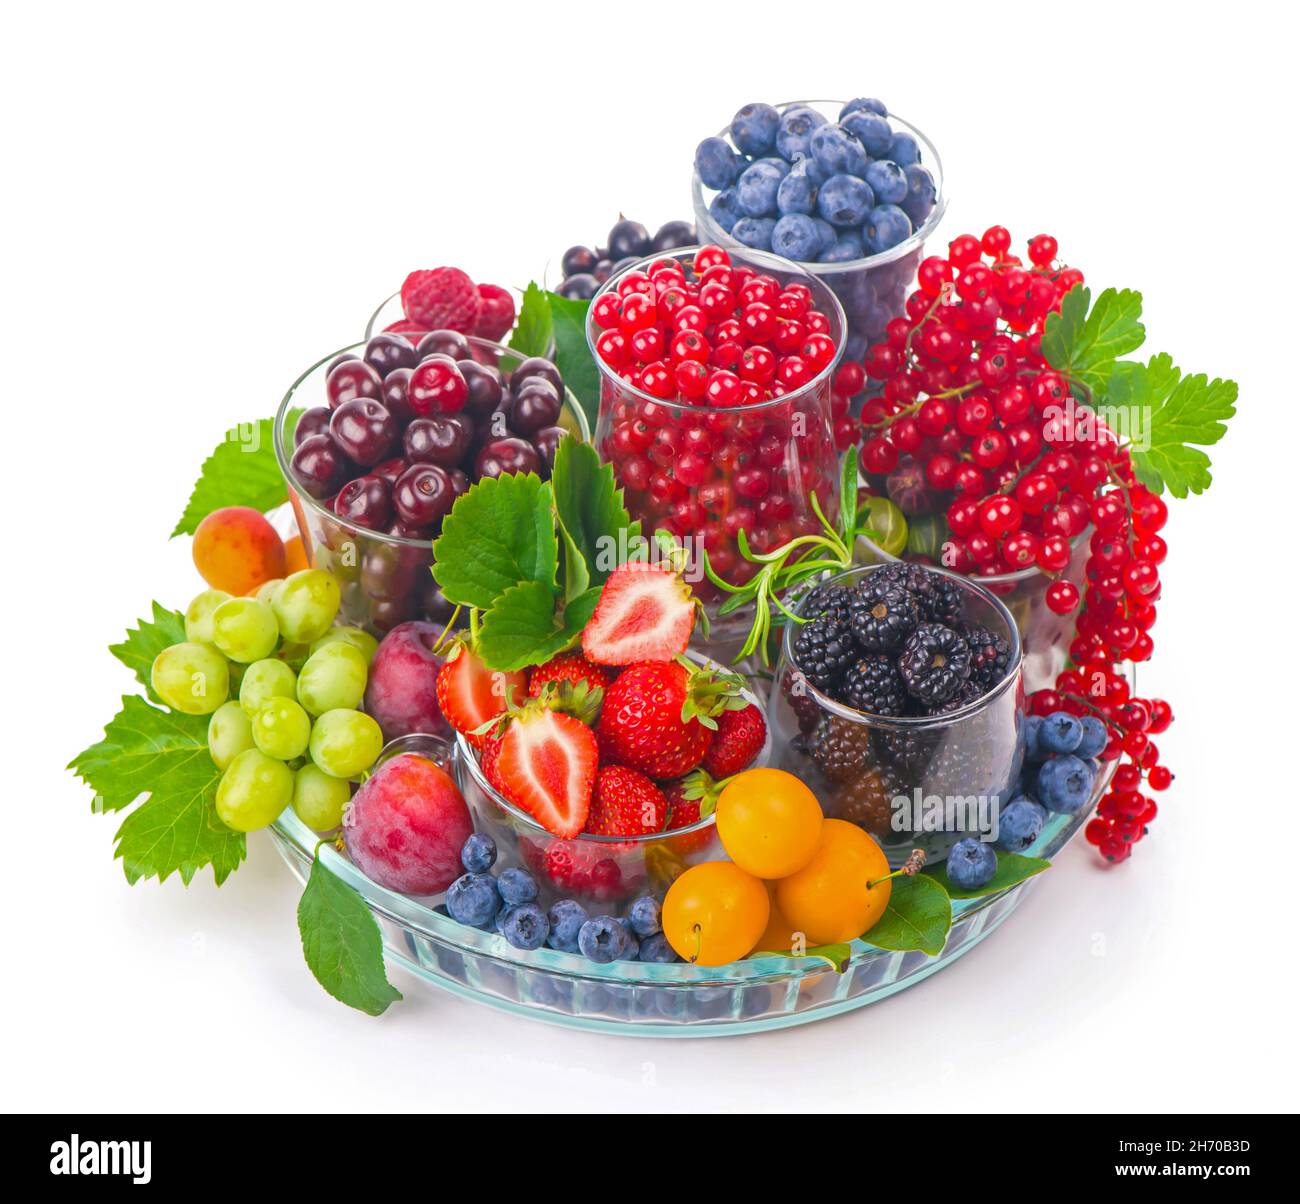 Mix Of Fresh Fruits And Berries Raw Food Ingredients Nutrition Background  Stock Photo, Picture and Royalty Free Image. Image 29758828.